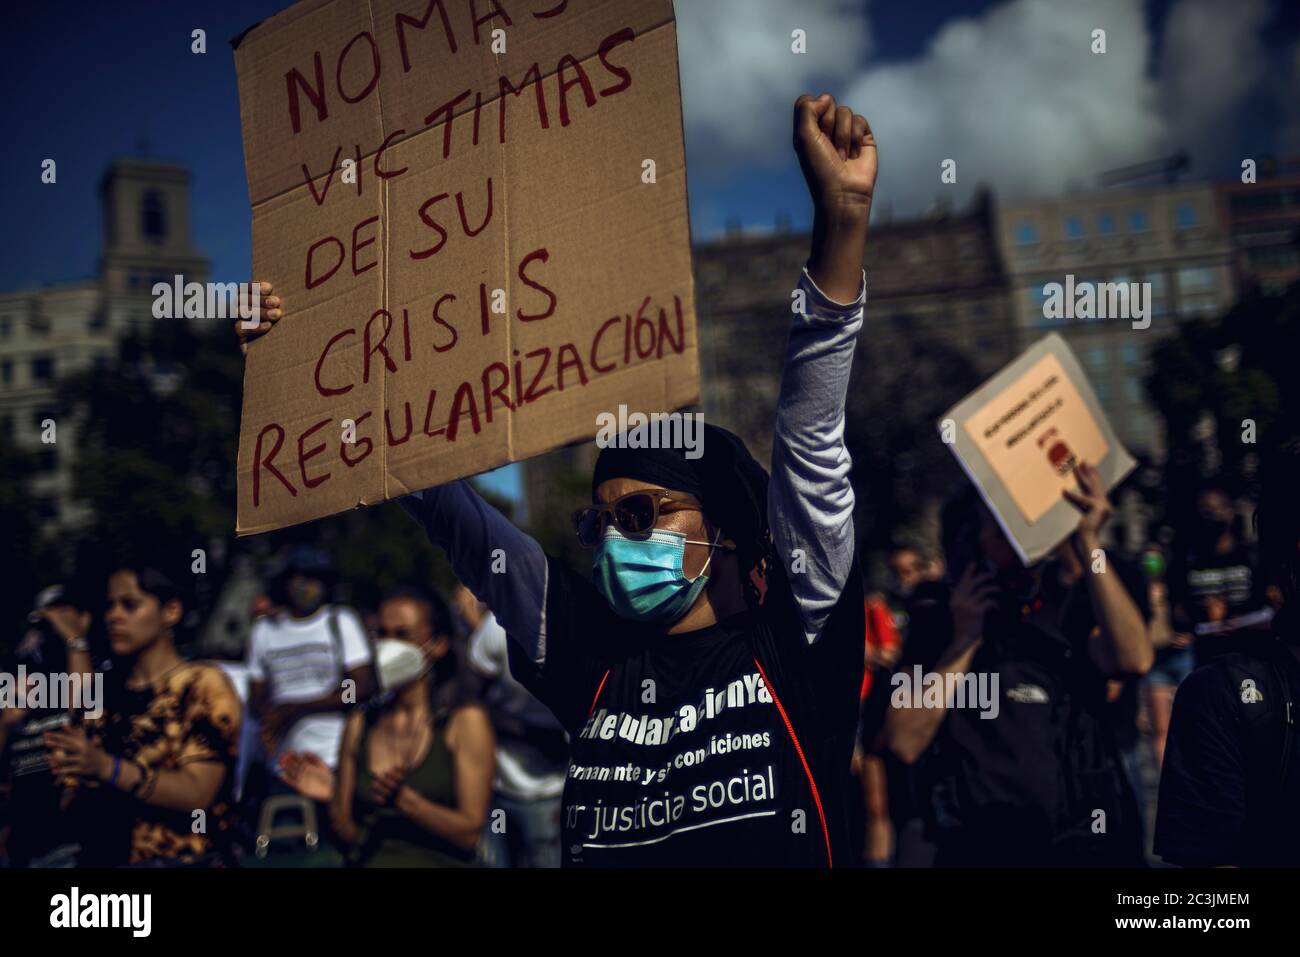 Barcelona, Spain. 20th June, 2020. An immigrant protests for documents and regulation holding a placard reading 'no more victims of your crisis - regulation' after the completion of a gradual way to 'the new normal' rolling back a nationwide strict lockdown due to the continuous spread of the corona virus. Illegal migrants without documents are among the most affected by the struggling economy due to the corona virus while they remain excluded from all state aid programs. Credit: Matthias Oesterle/Alamy Live News Stock Photo